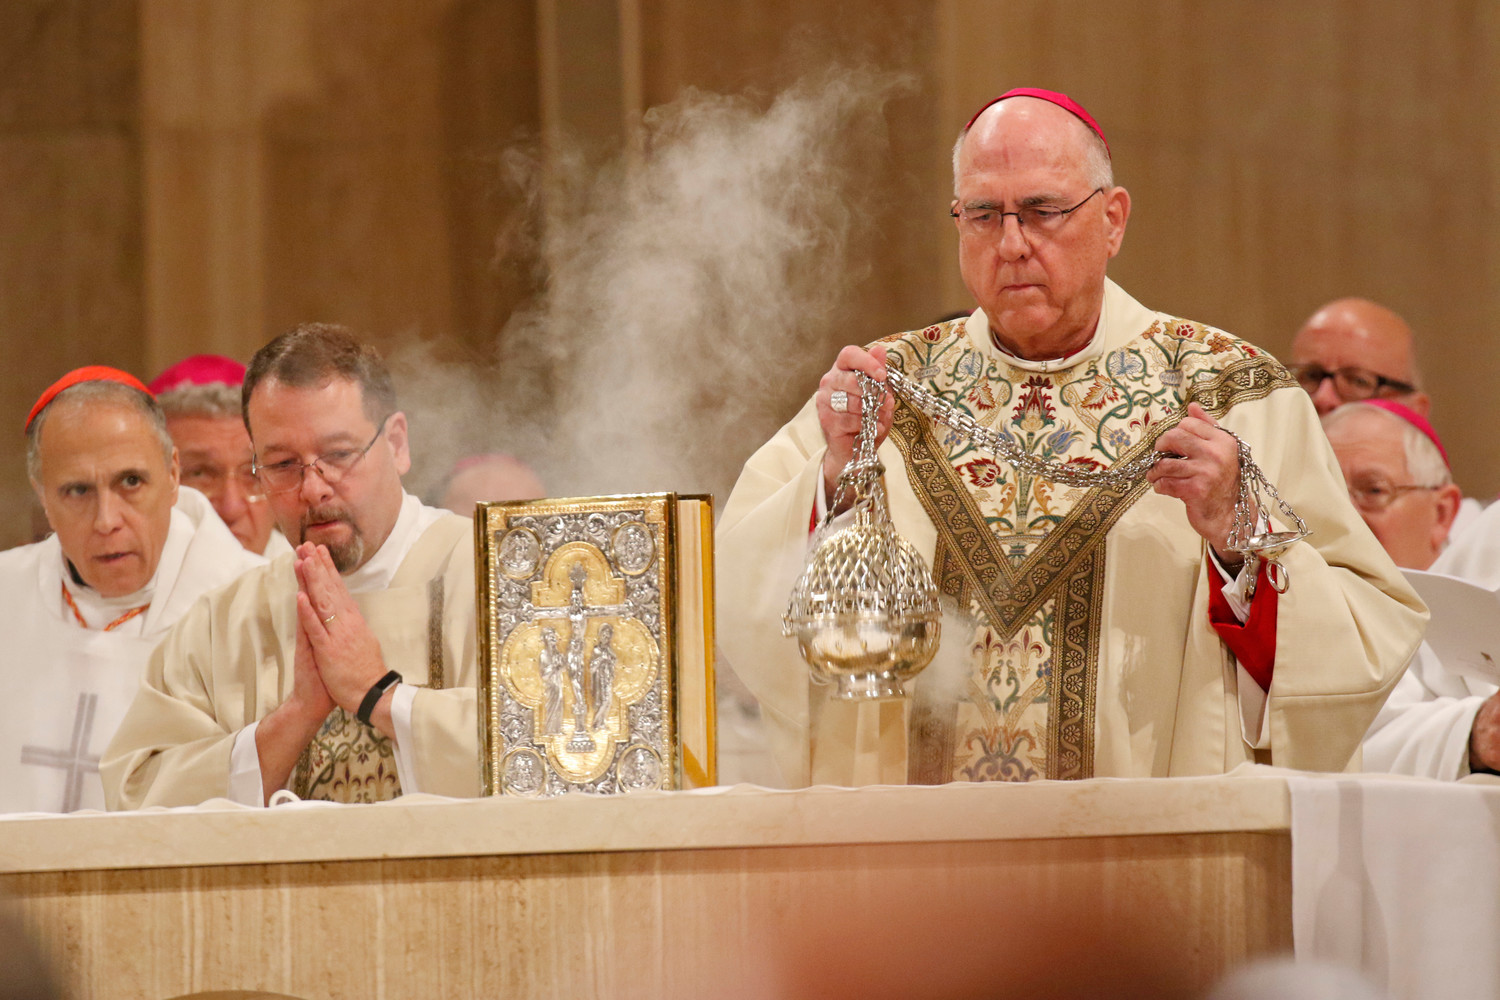 Archbishop Joseph F. Naumann of Kansas City, Kan., chairman of the U.S. bishops’ Committee on Pro-Life Activities, uses a censer while serving as the principal celebrant of the opening Mass of the National Prayer Vigil for Life Jan. 17 at the Basilica of the National Shrine of the Immaculate Conception in Washington.